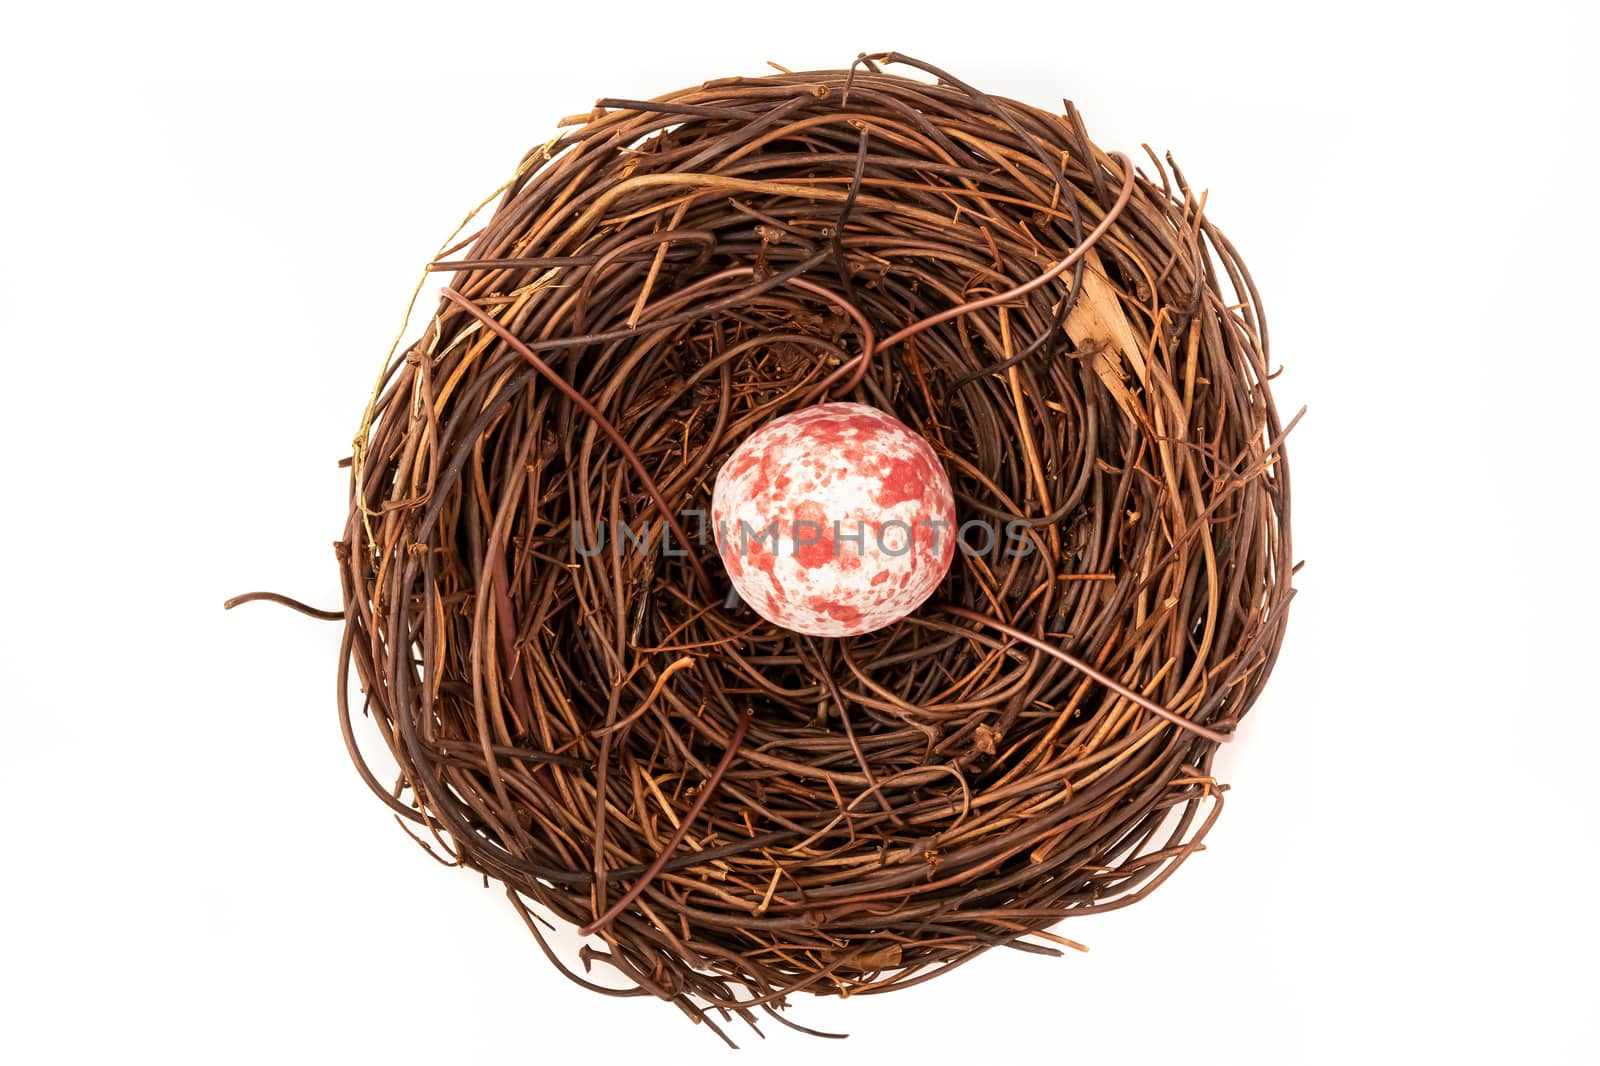 A bird nest with one small spotted pink and white egg.